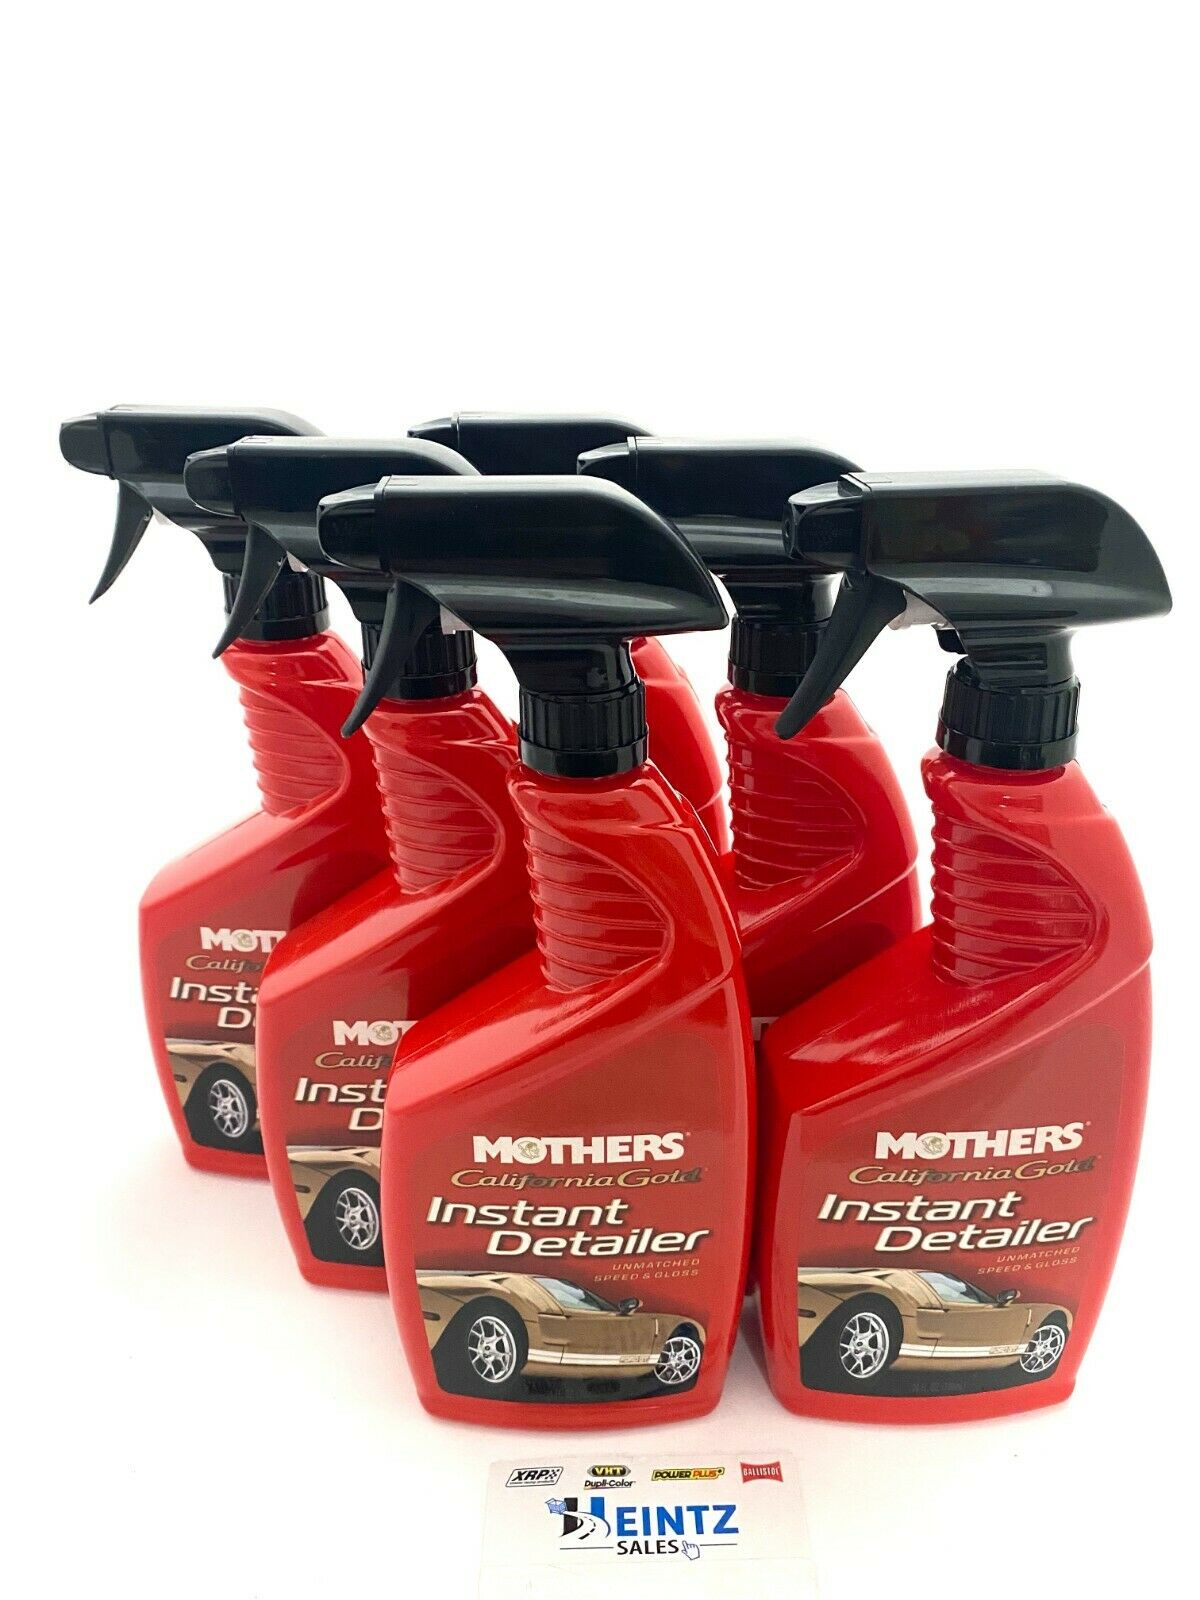 MOTHERS 08224 California Gold Instant Detailer Showtime 6 PACK - Unmatched Gloss - 24 oz.